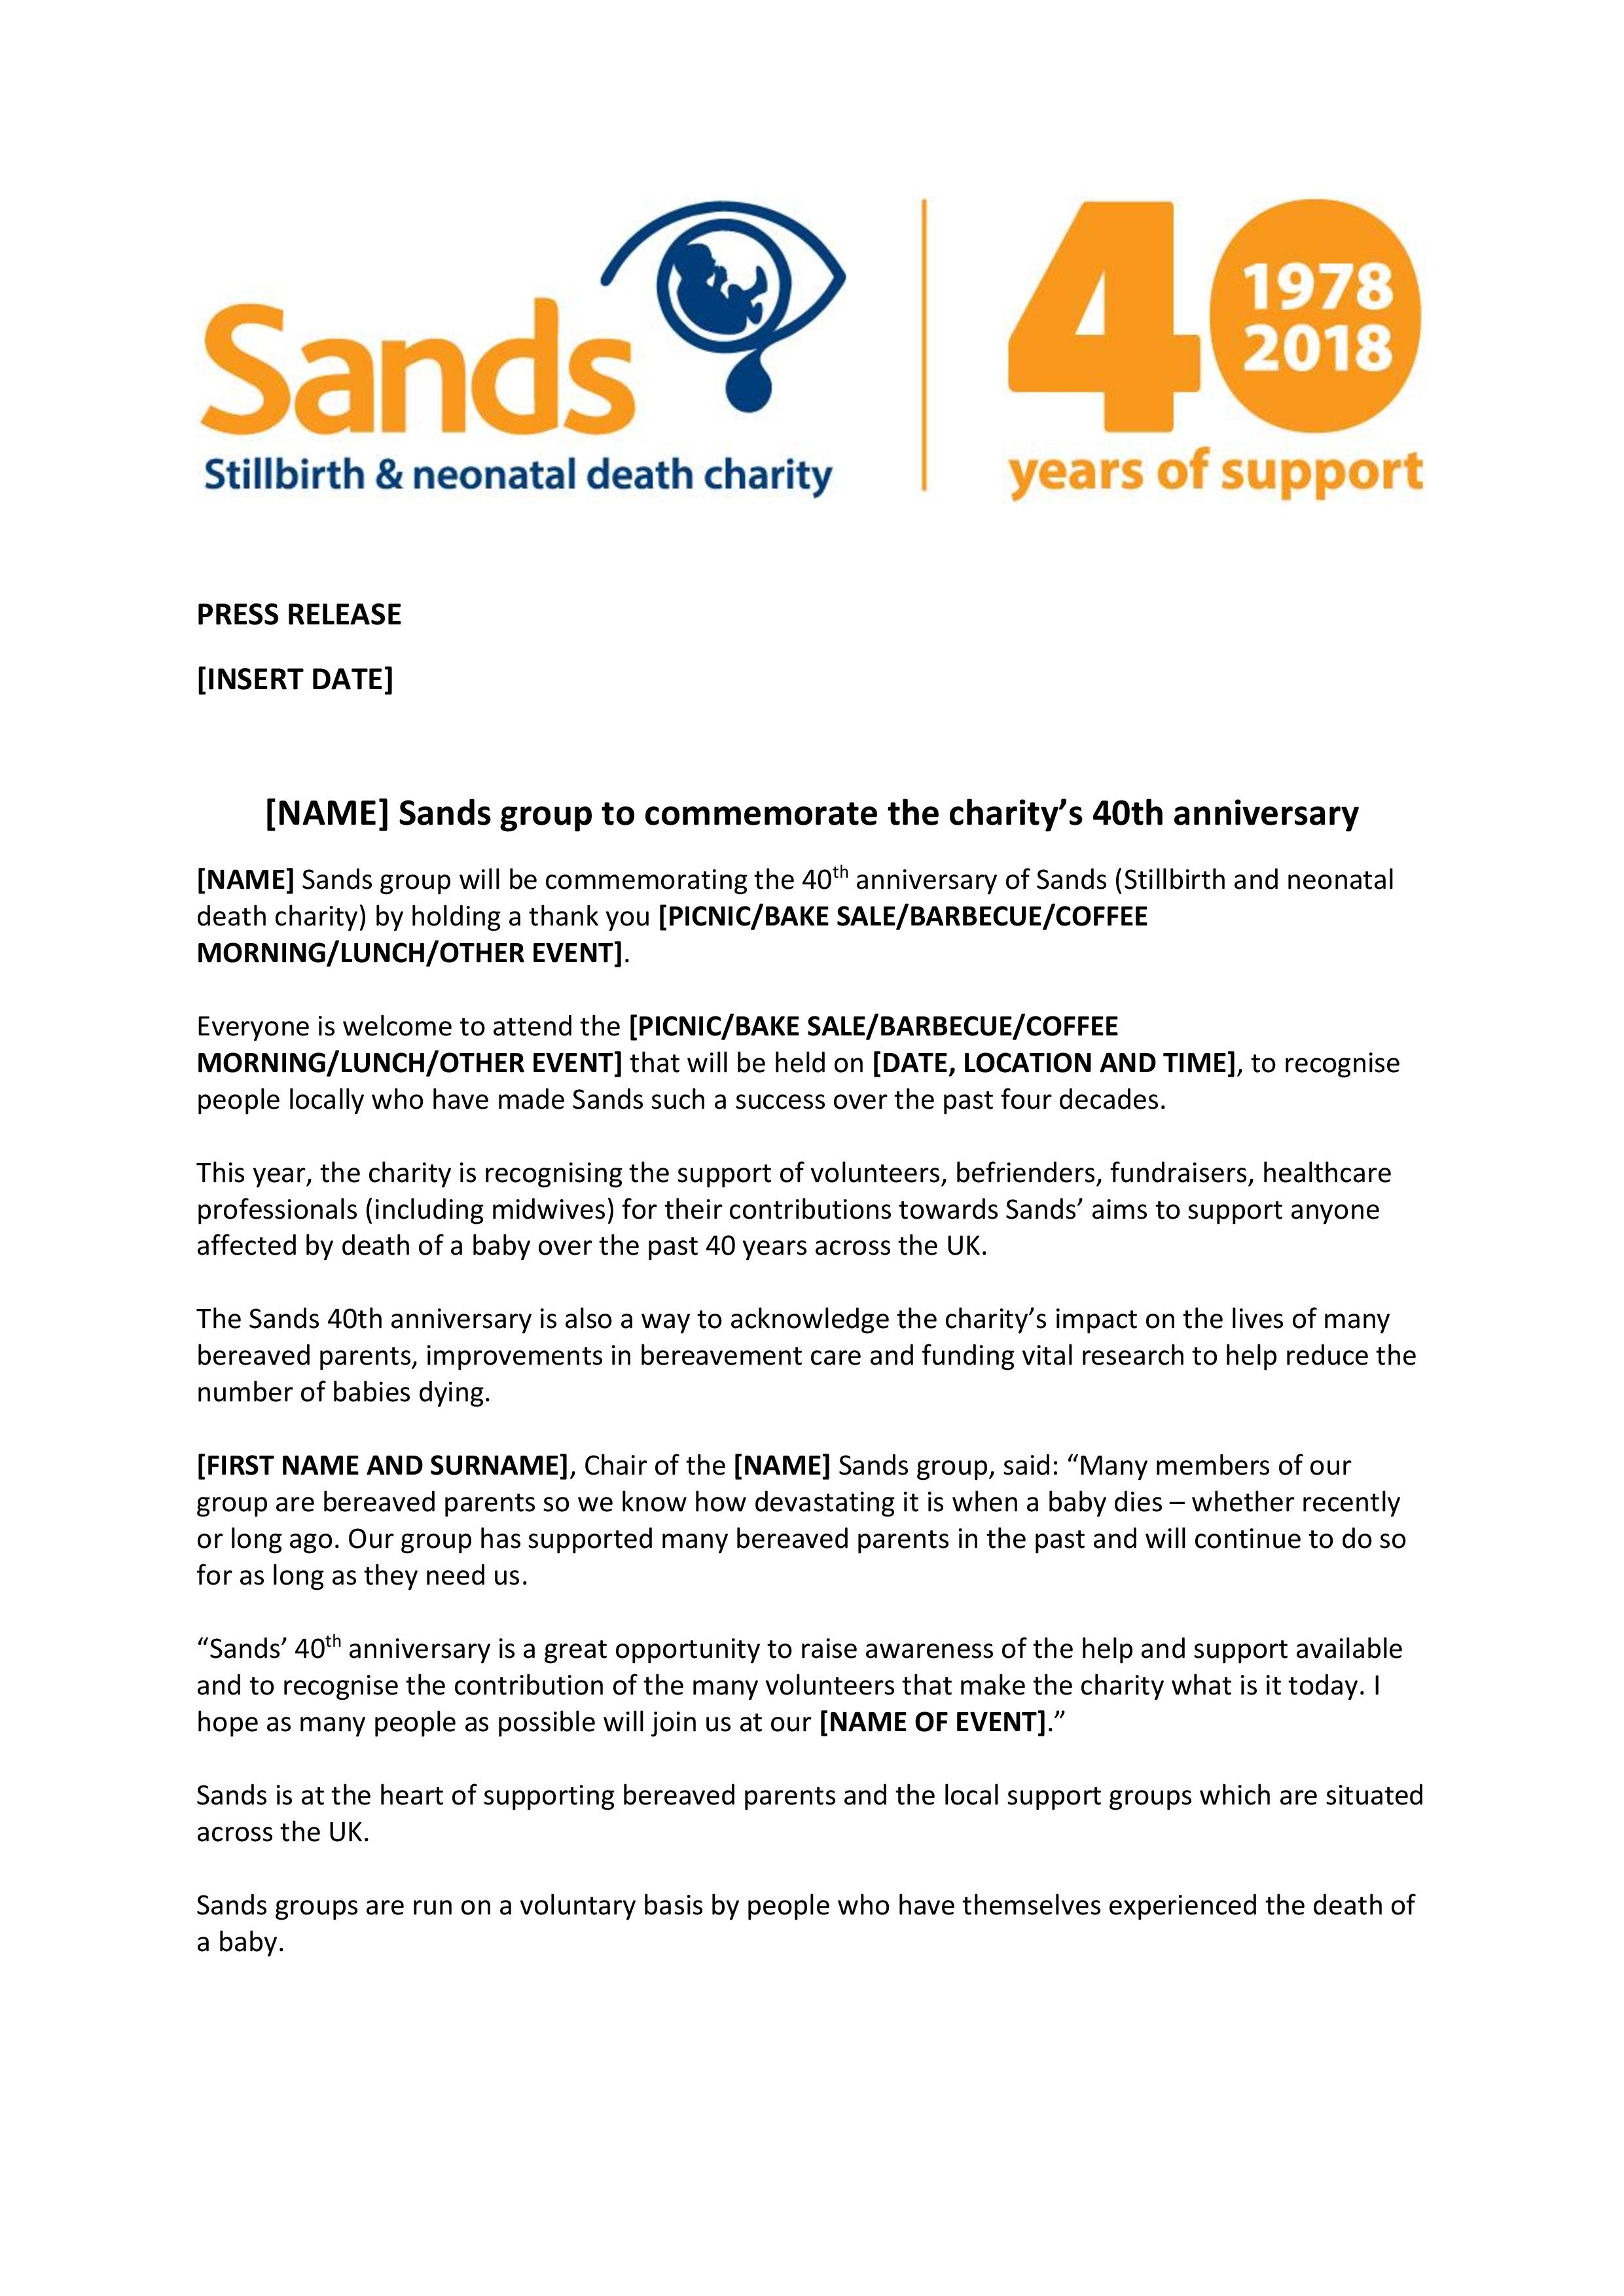 Press release template for groups - Sands 40th anniversary